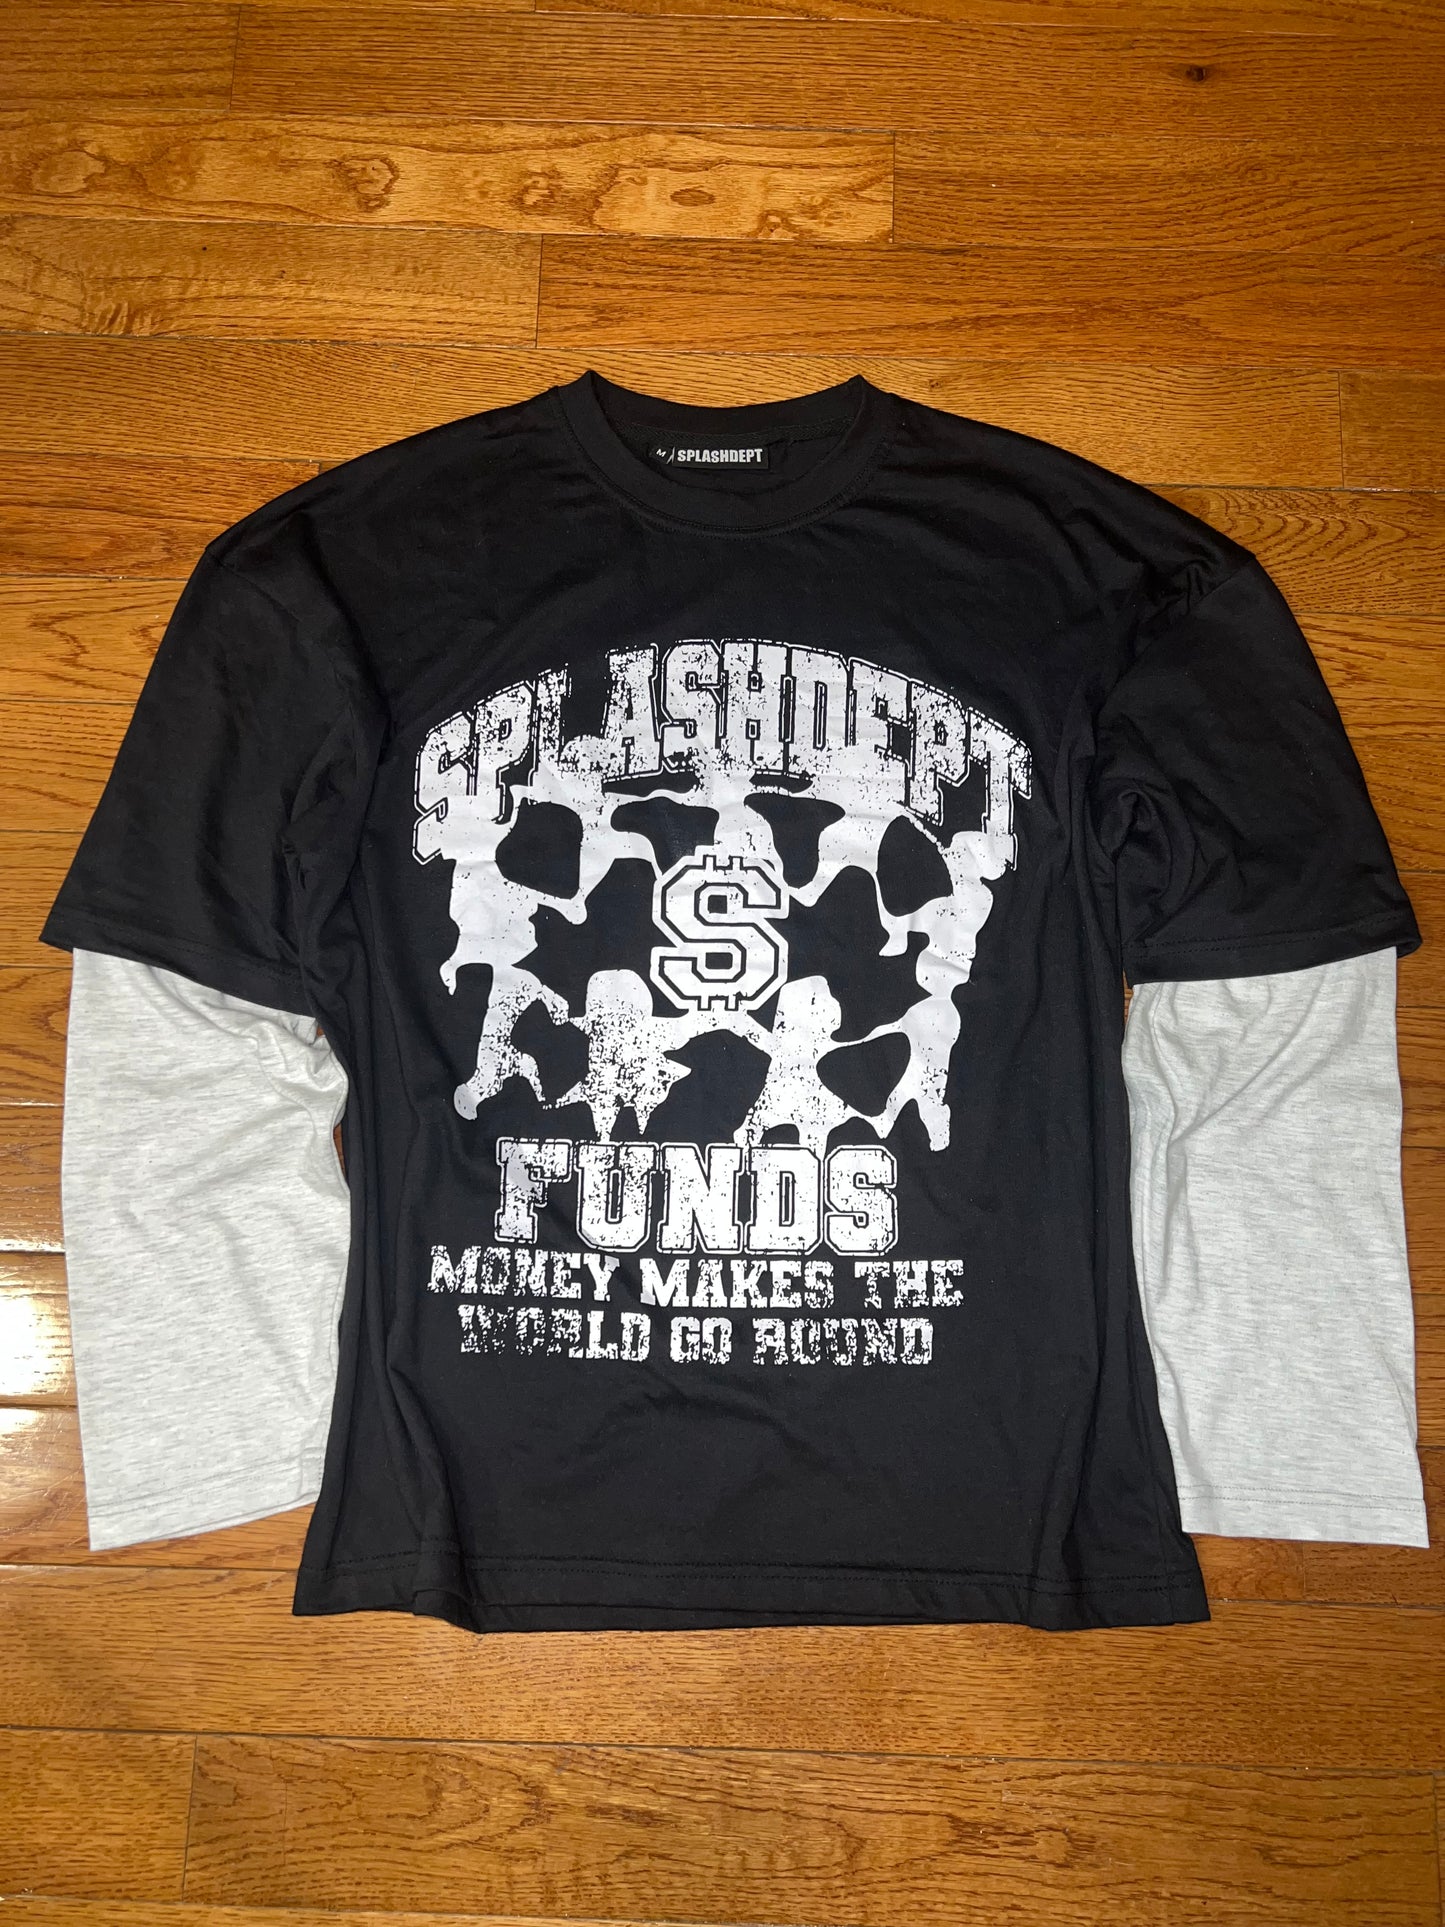 Funds Tee